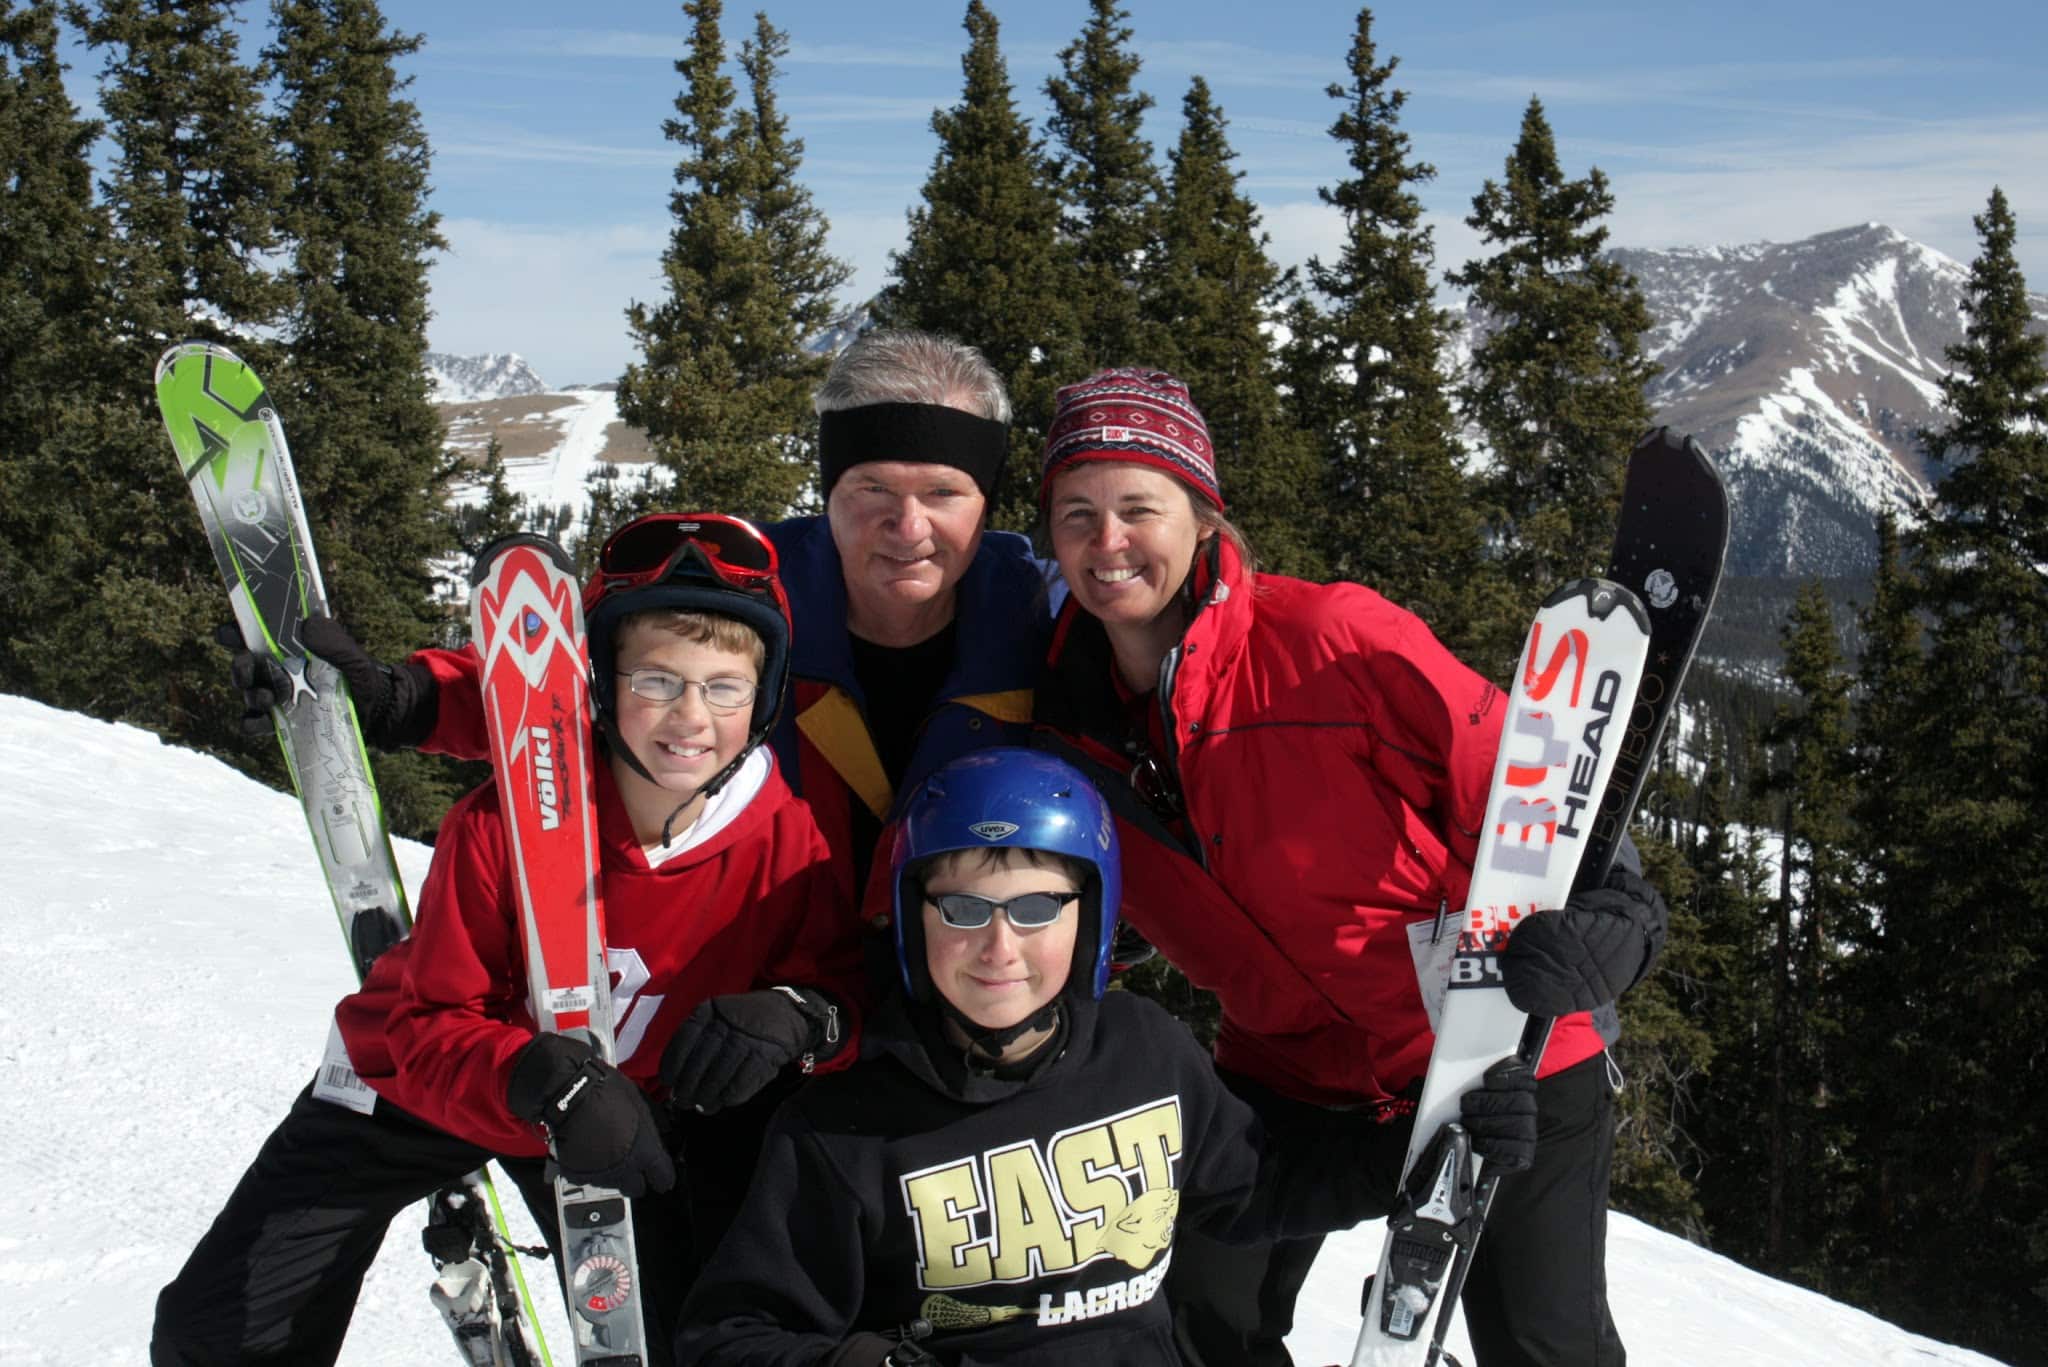 Exterior sunny winter day at ski area with a family posing with skis in hand.